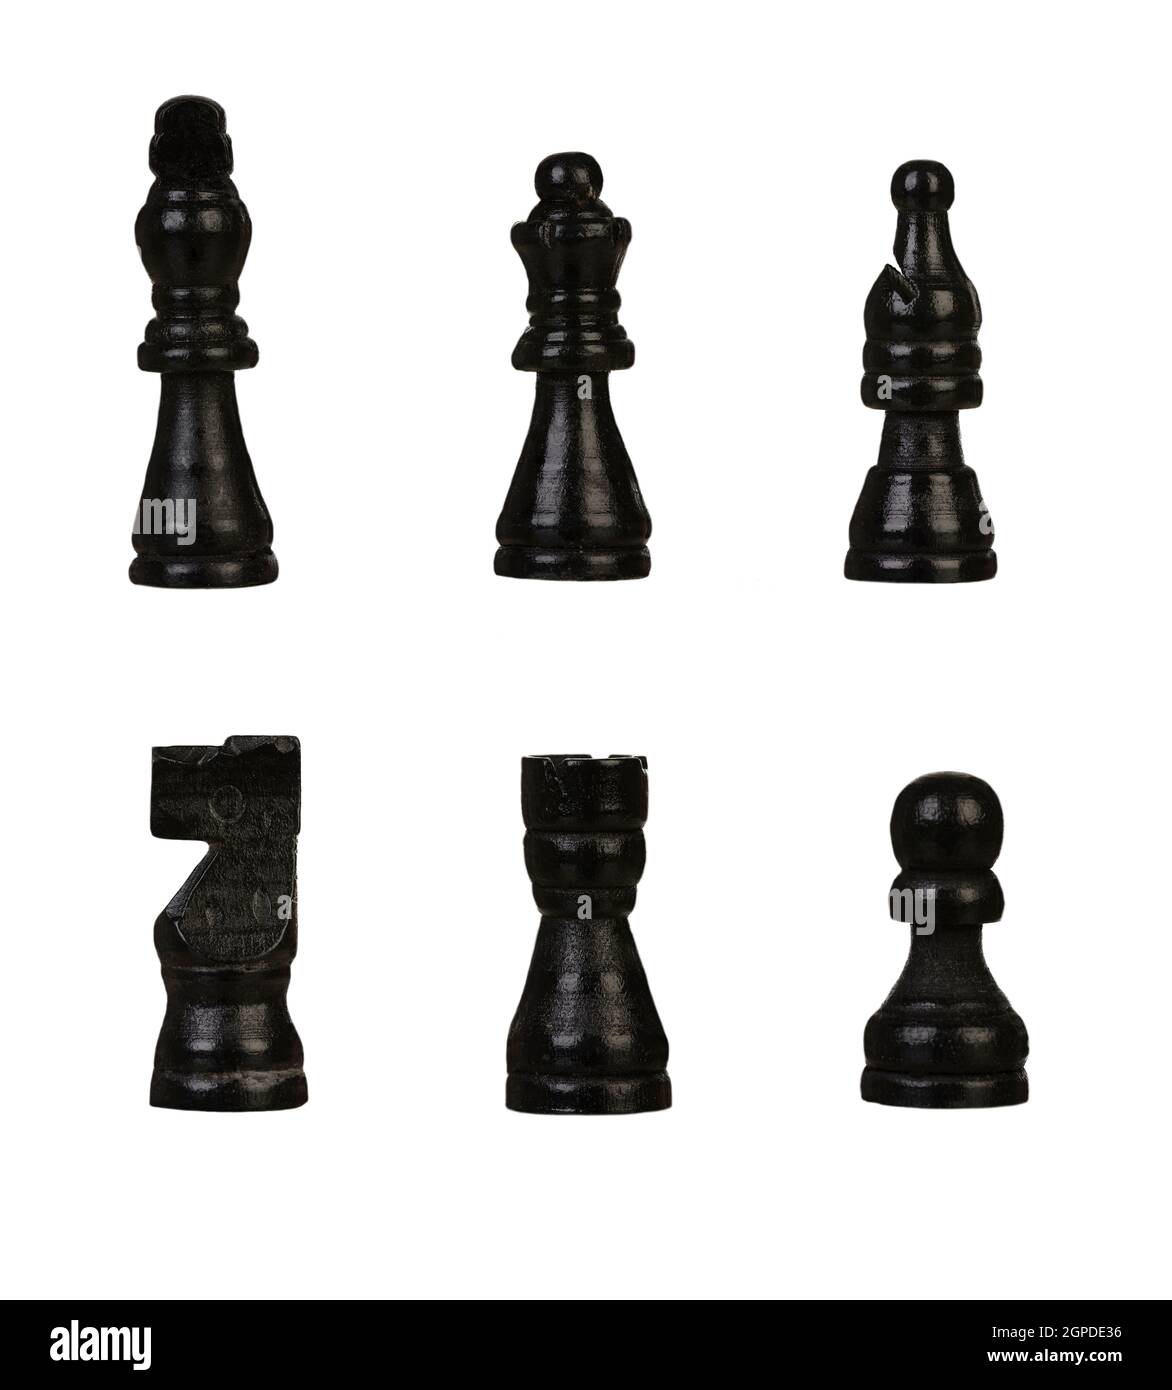 Black chess figures isolated on a white background Stock Photo